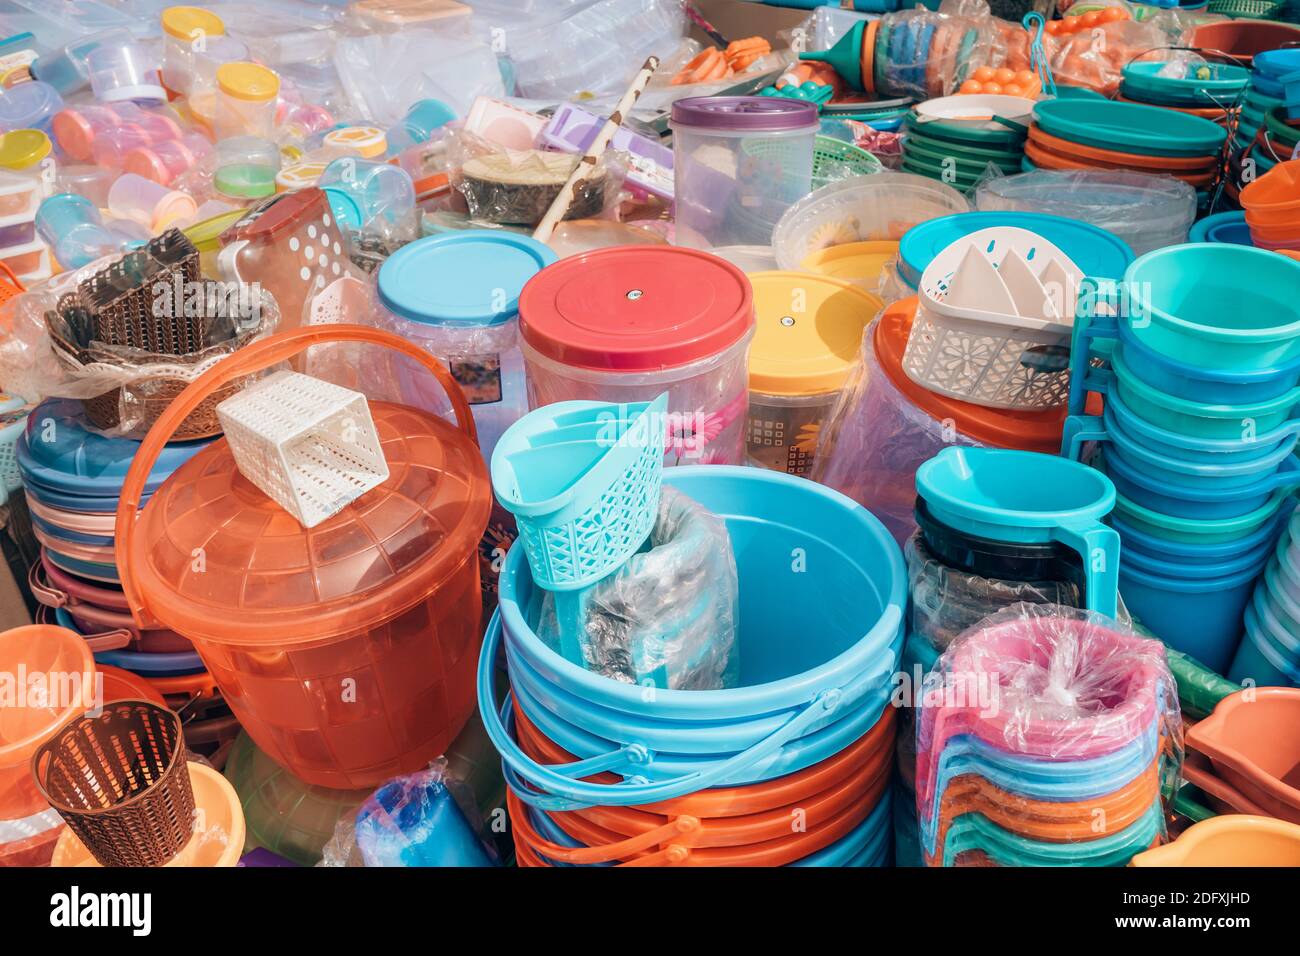 Cheap plastic household items for sale on the market close-up Stock Photo